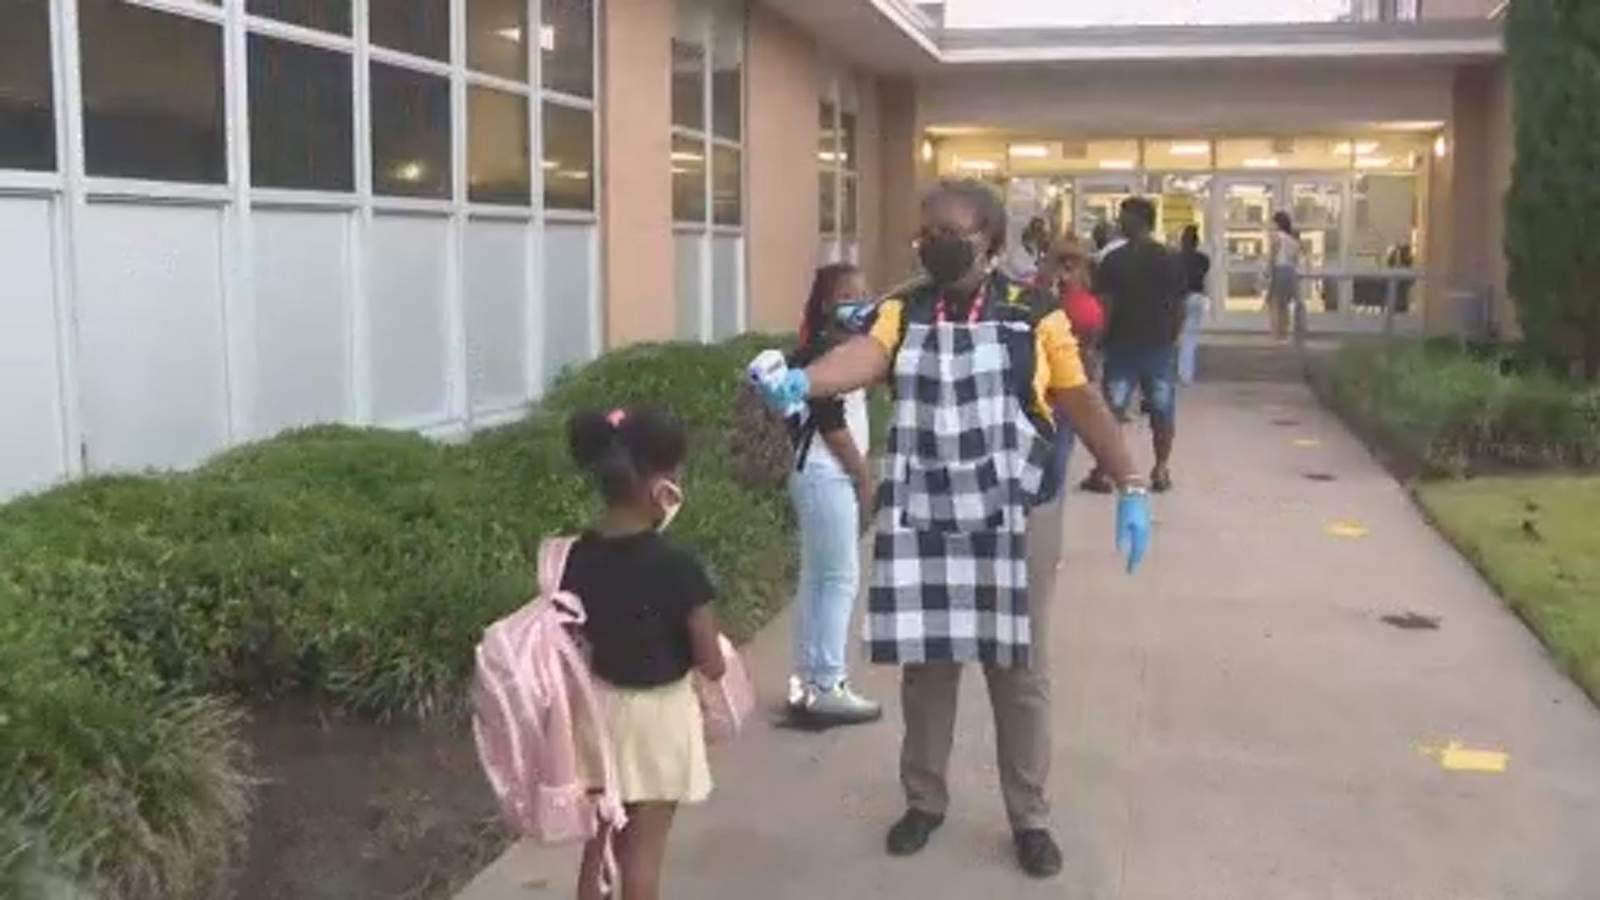 HISD students return to in-person learning since pandemic began